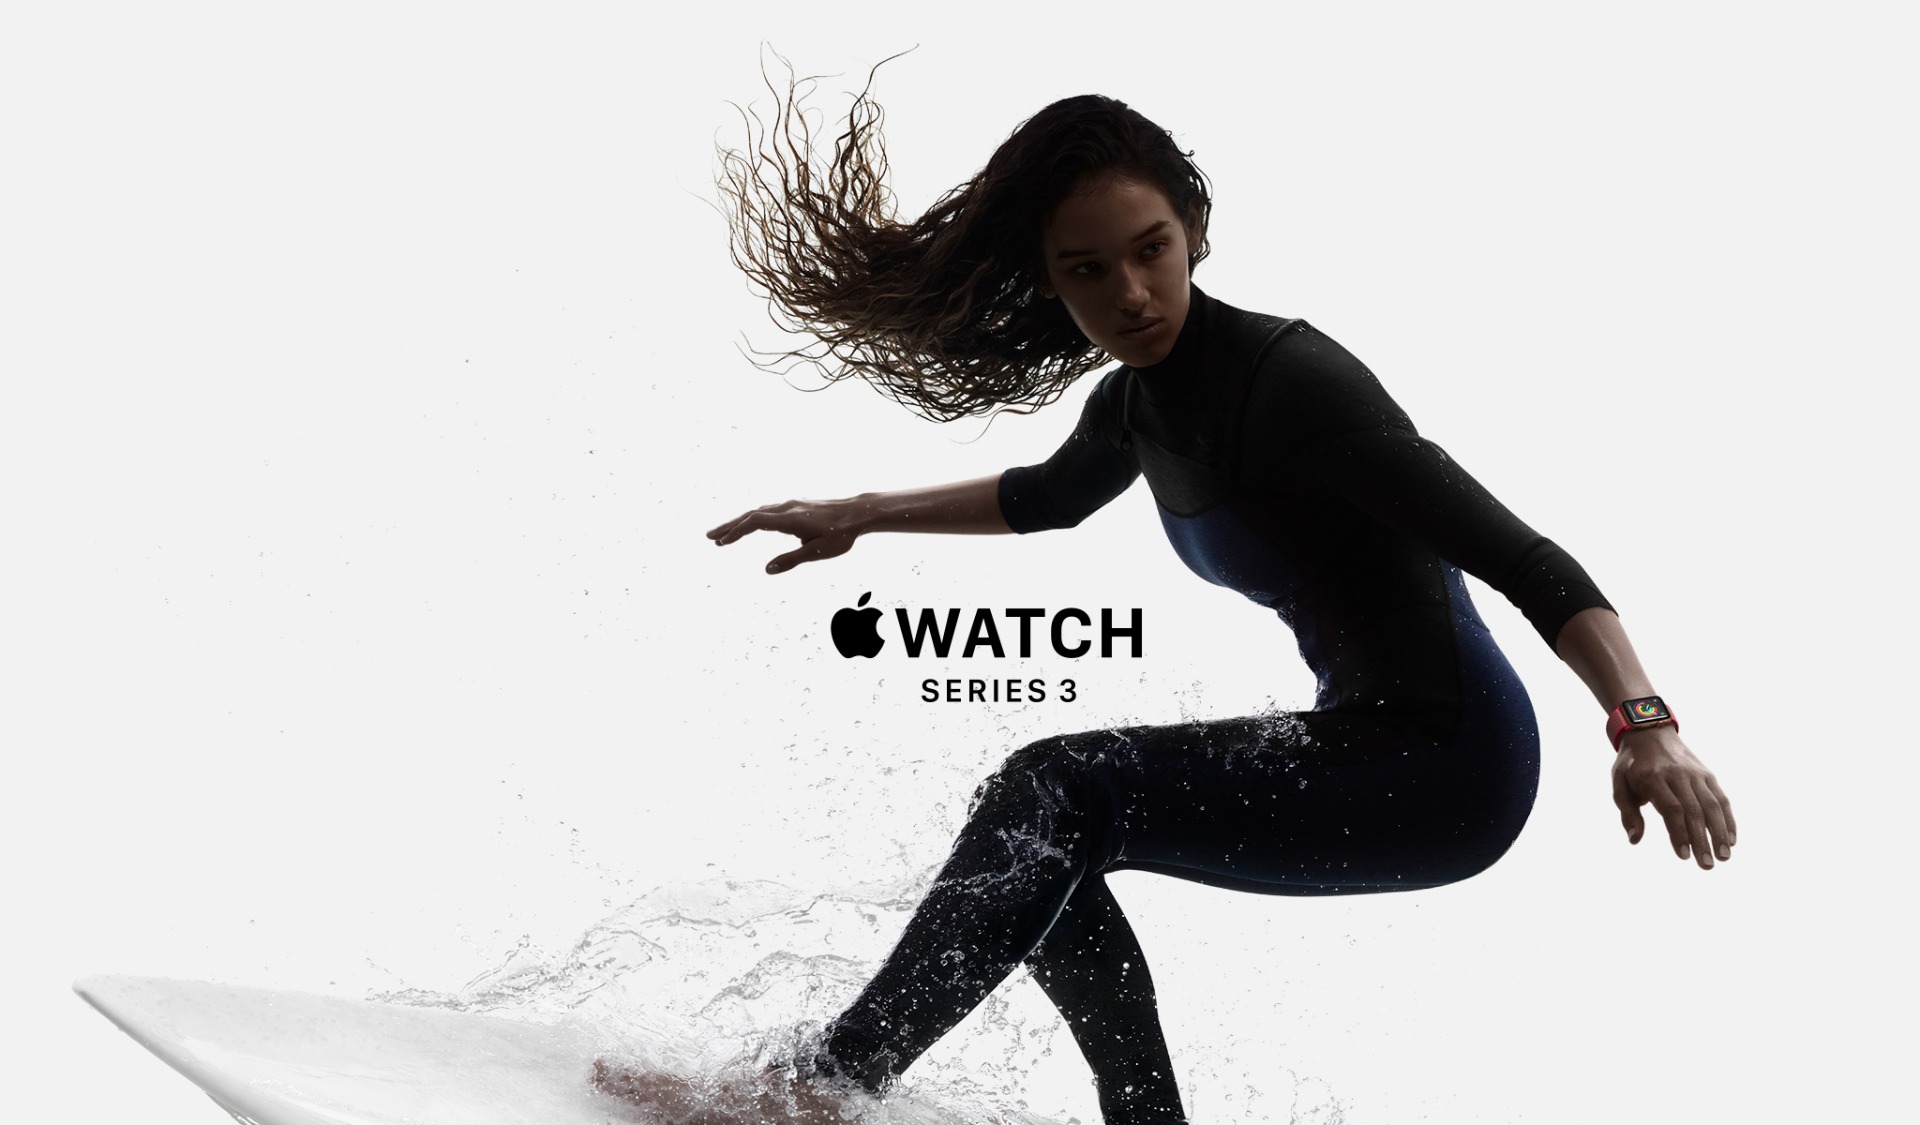 Apple Watch Series 3. Elevated in every way.